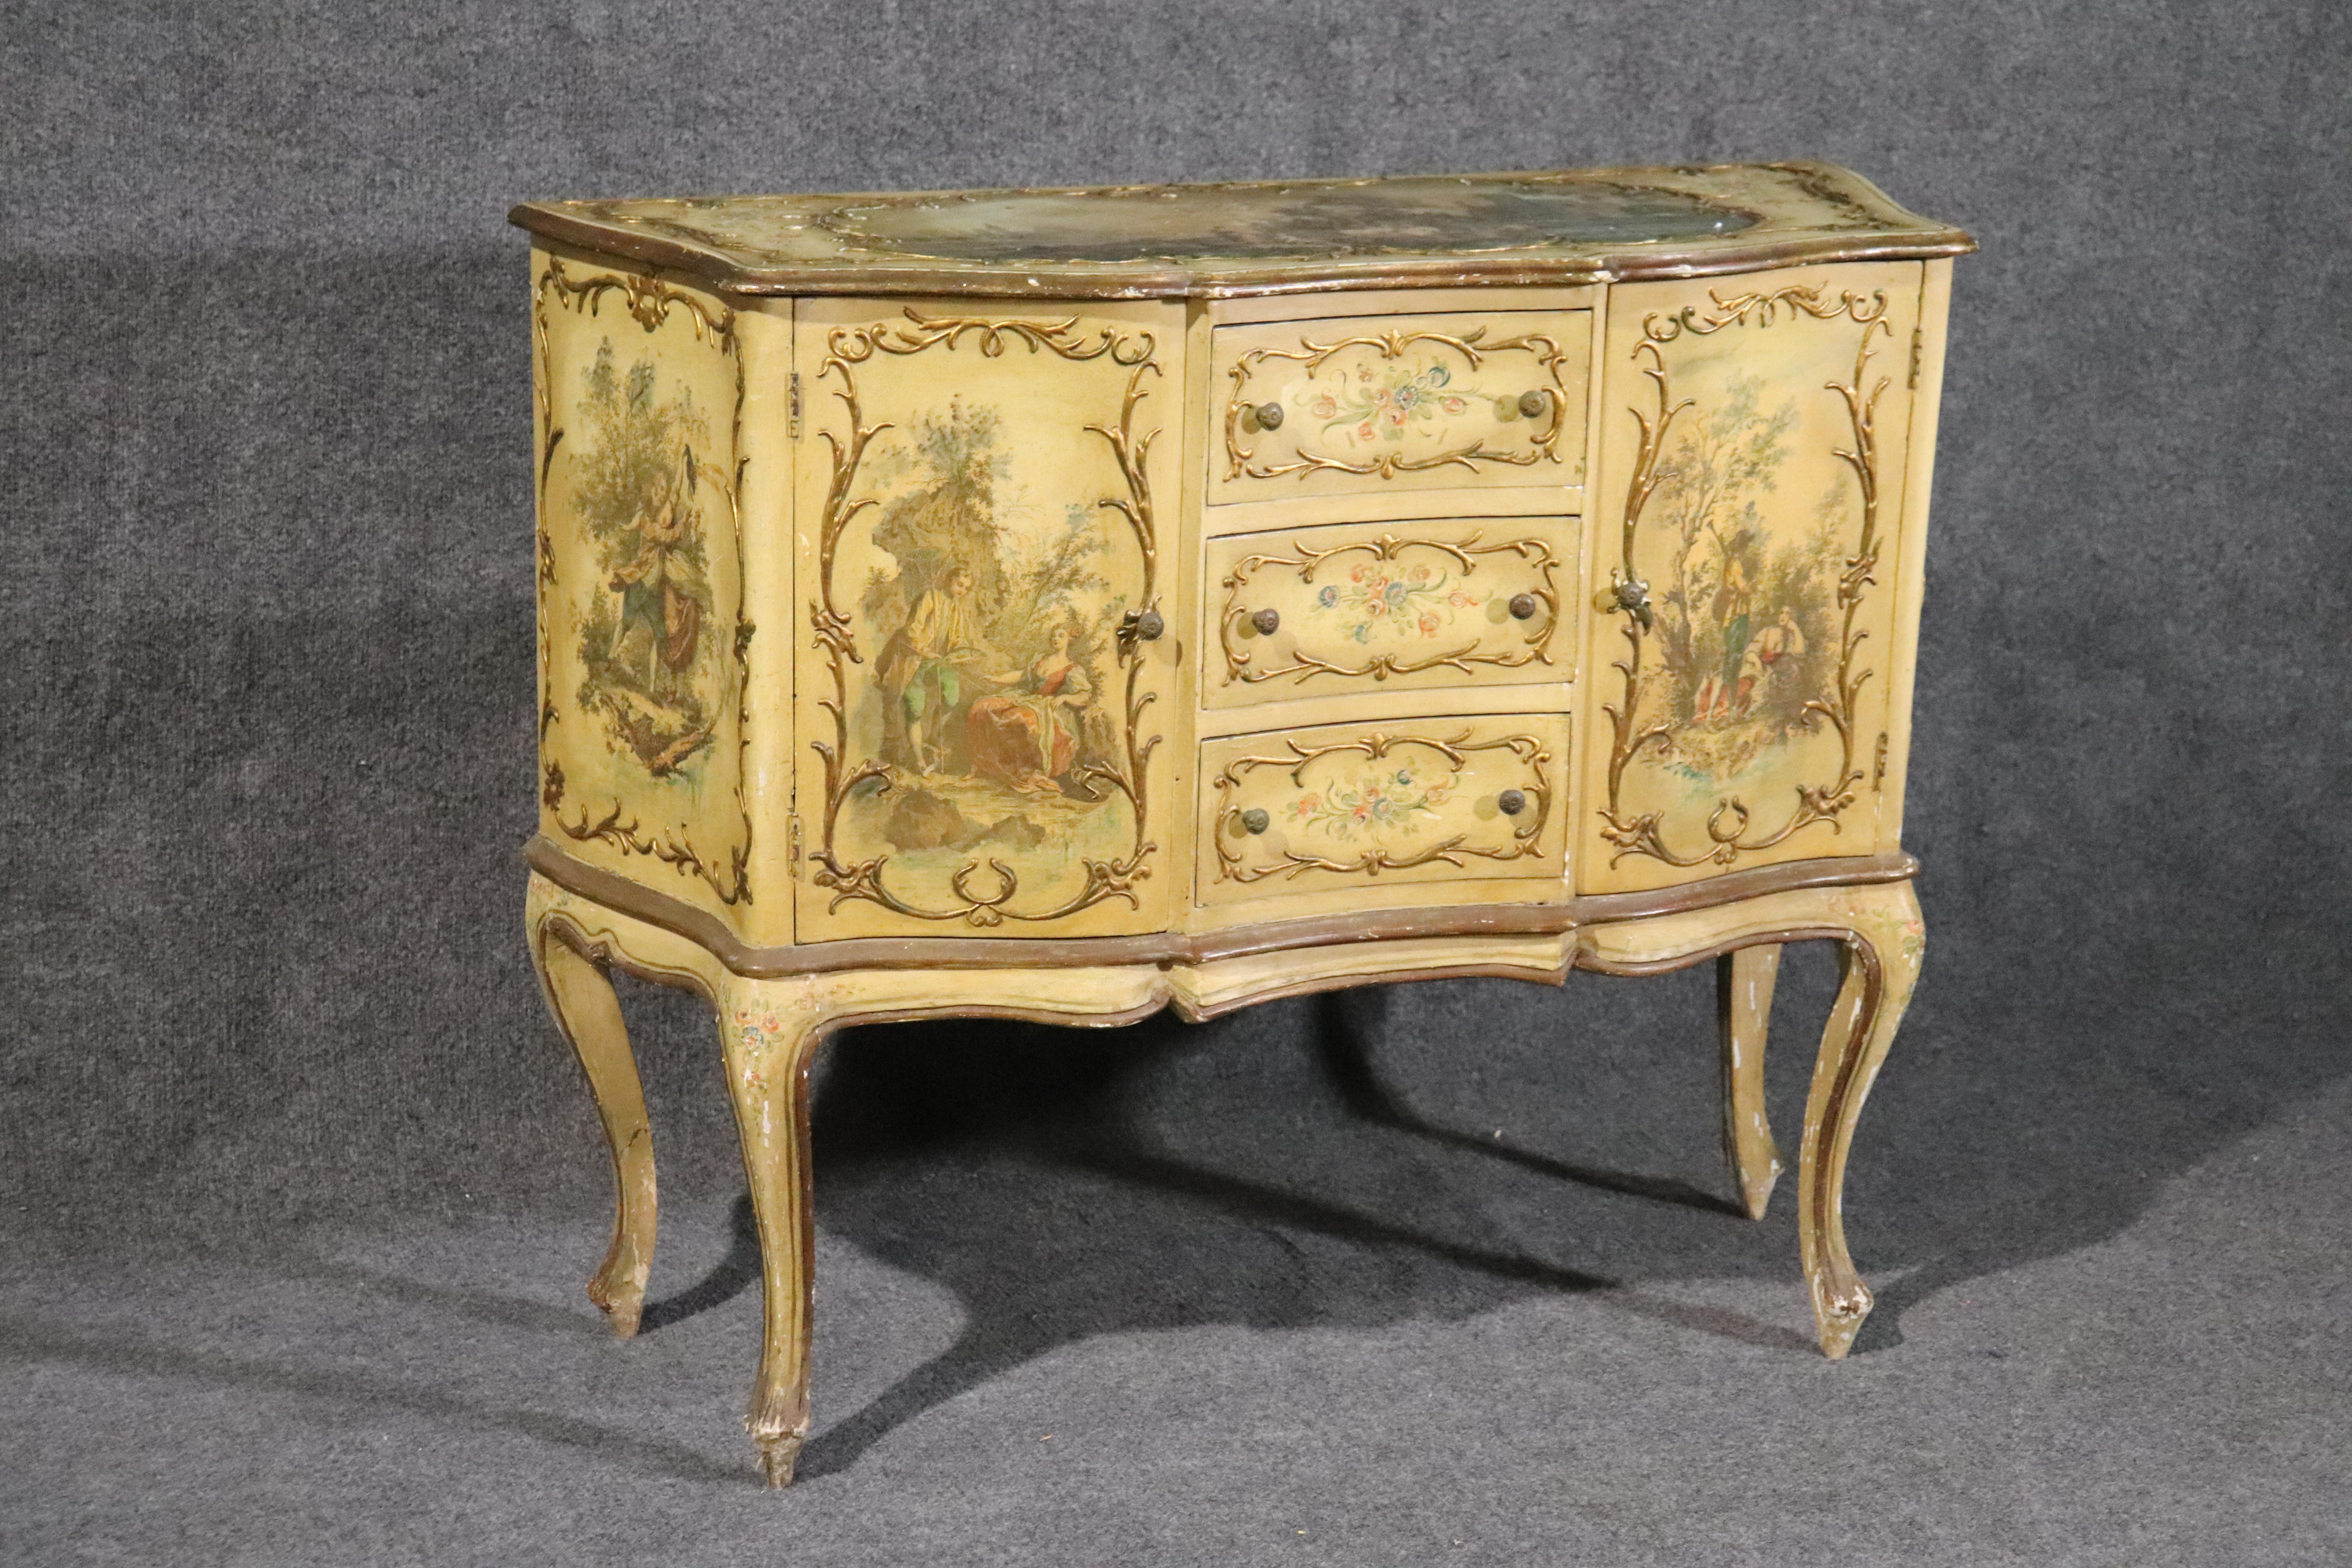 This is a beautifully made, time-worn Italian take on a French design. The piece has a great original finish and exhibits 100 years of use but does it nicely. The cabinet can be used as a buffet or sideboard and measures 40 wide x 33.5 tall x 16